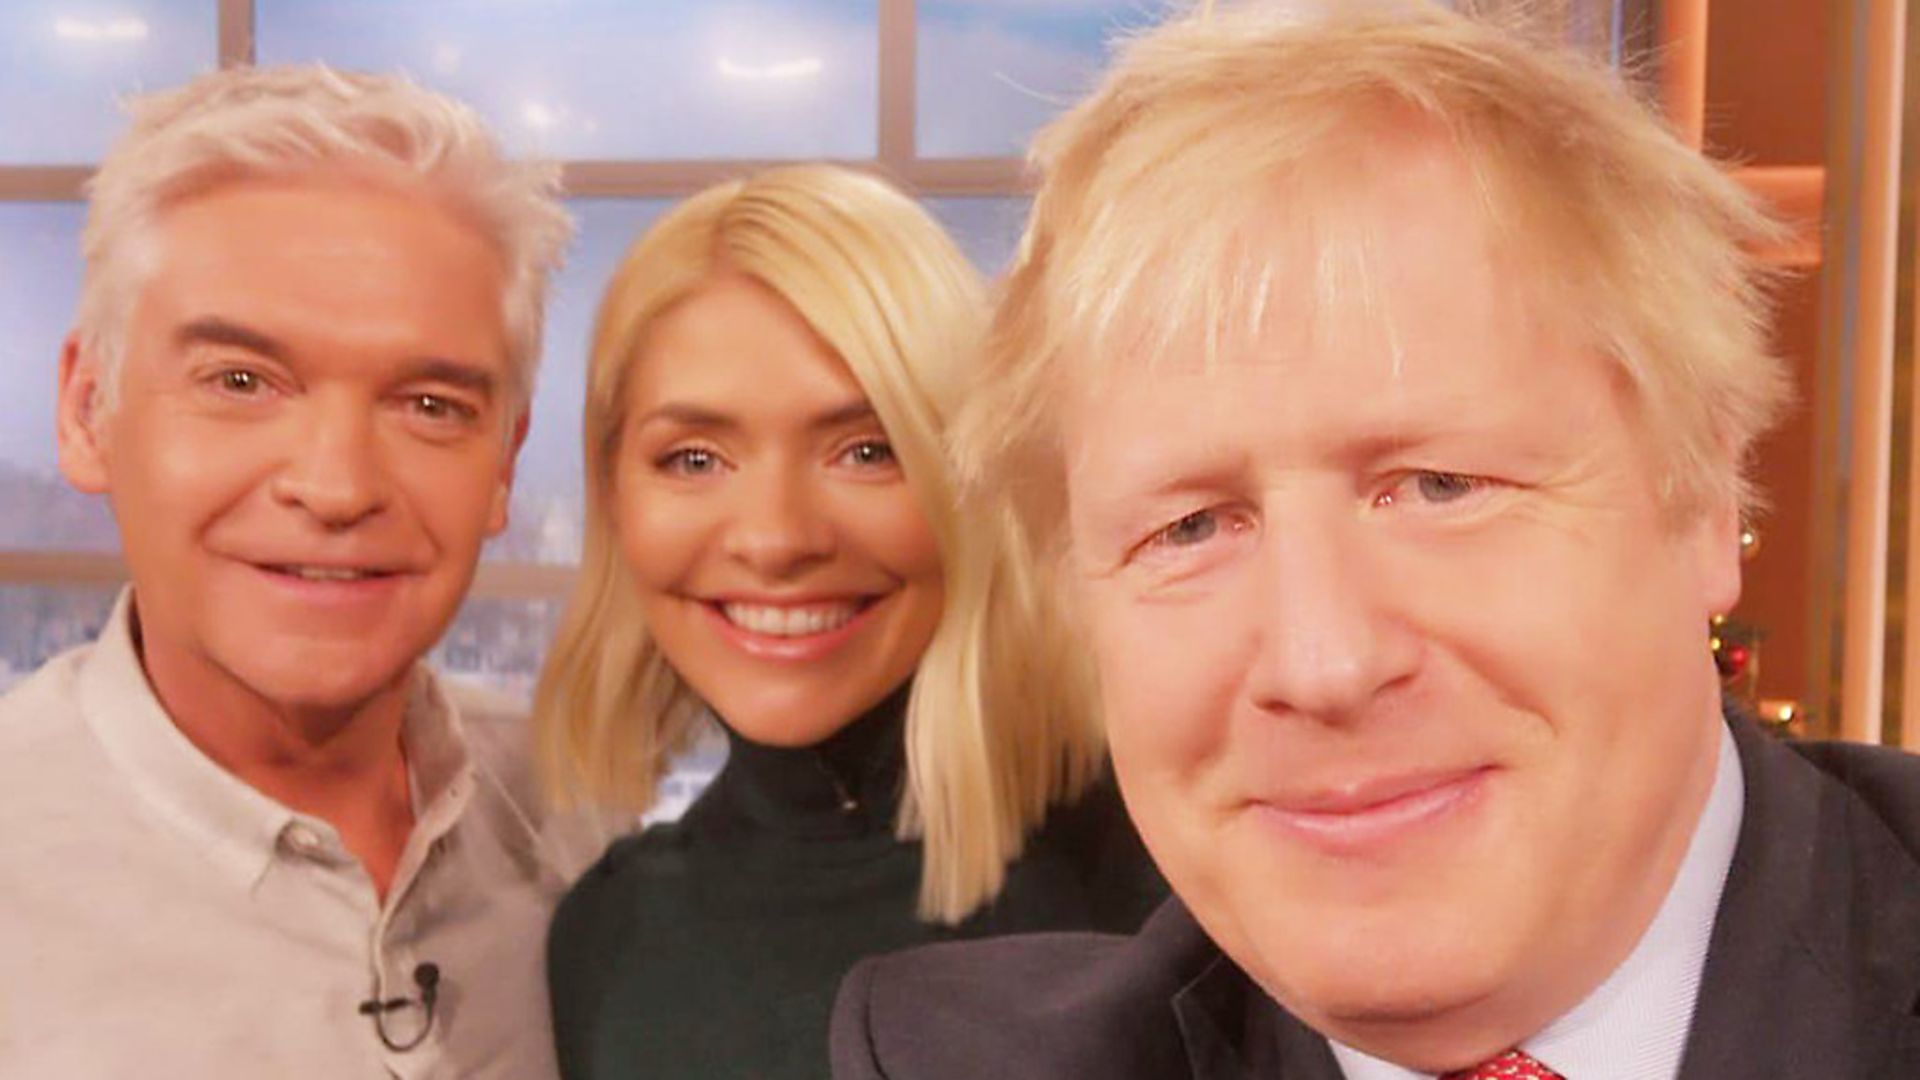 The selfie that Boris Johnson took. But with which phone? Picture: Boris Johnson - Credit: PA